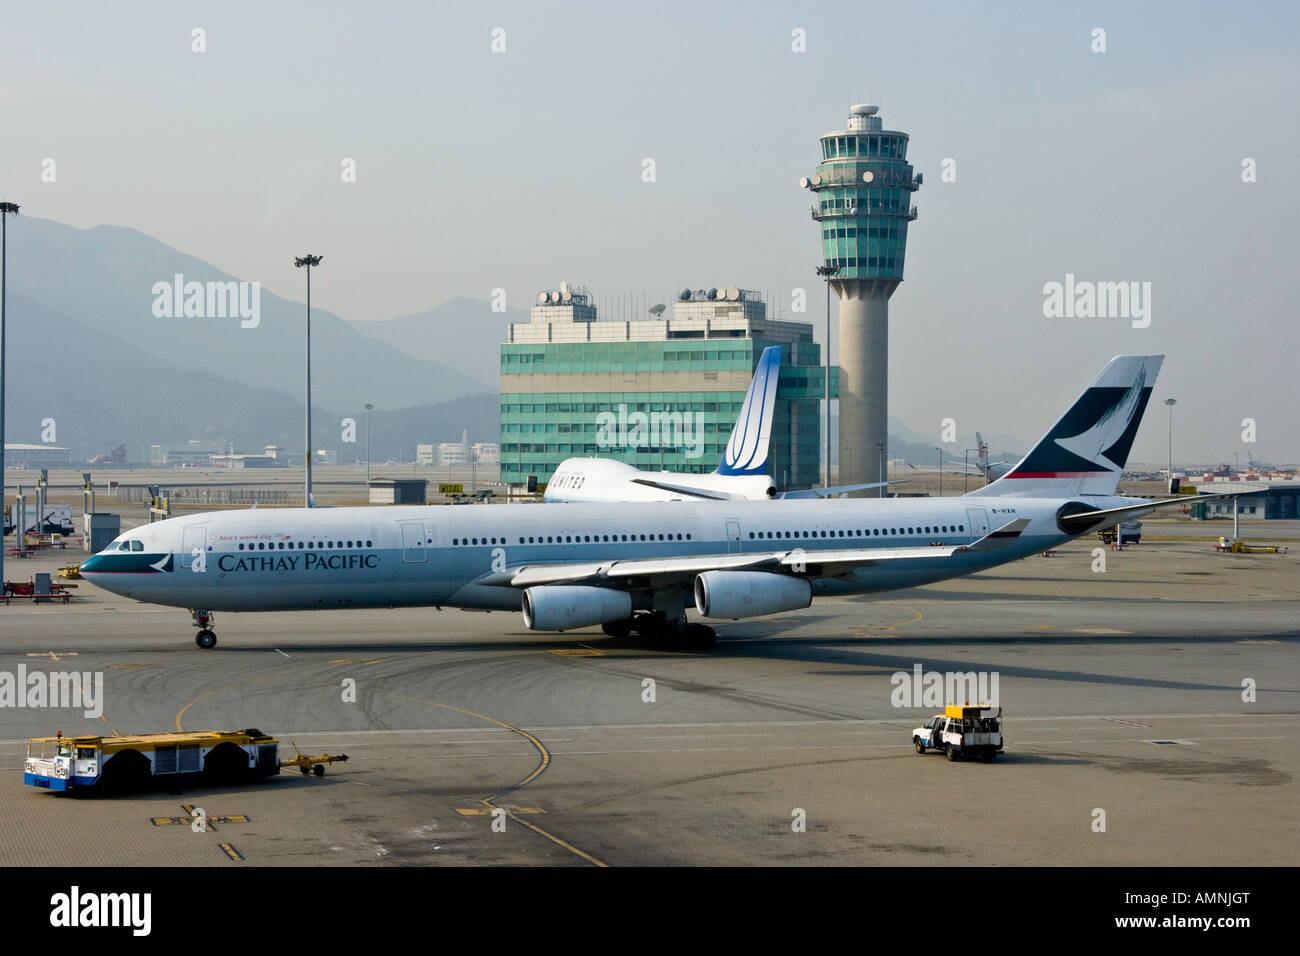 Cathay Pacific Airline Commercial Airplane and Conning Tower at HKG Hong Kong International Airport Stock Photo